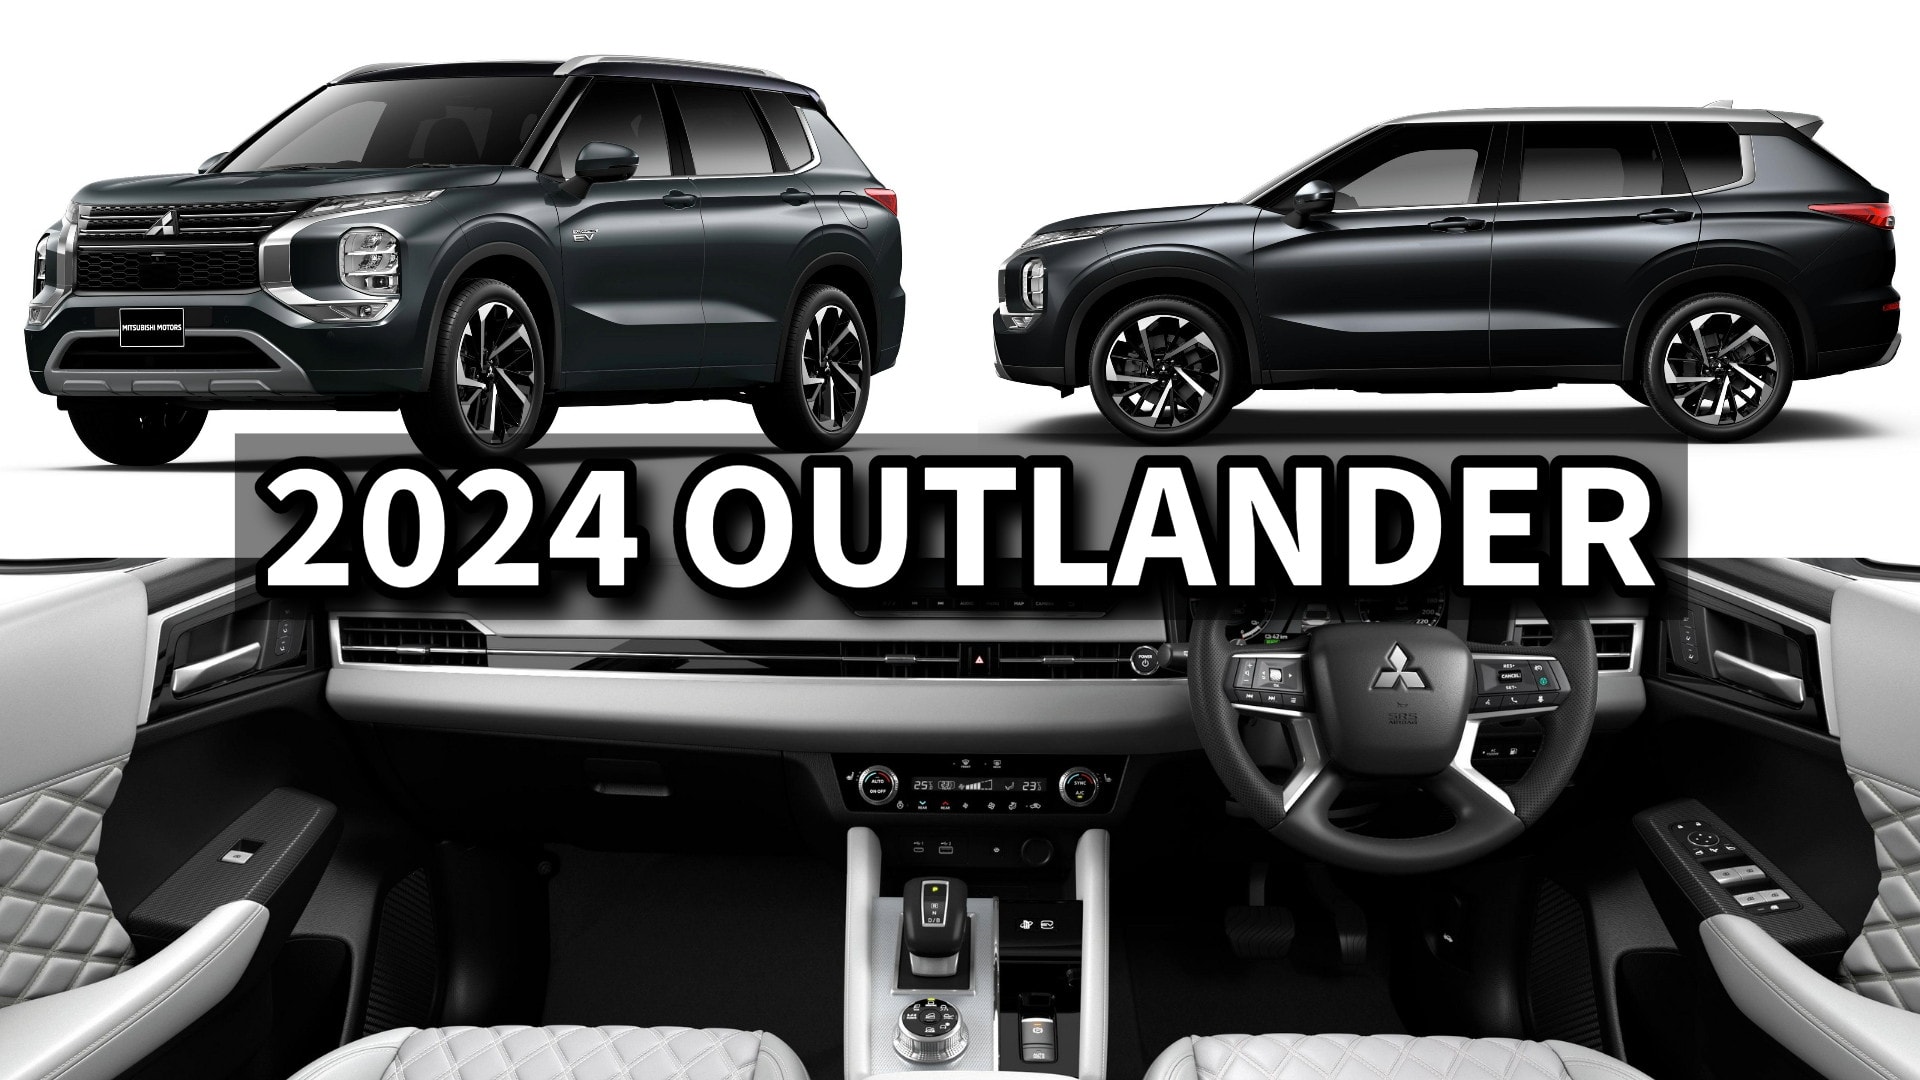 2024 Mitsubishi Outlander Arrives in Australia With New Features